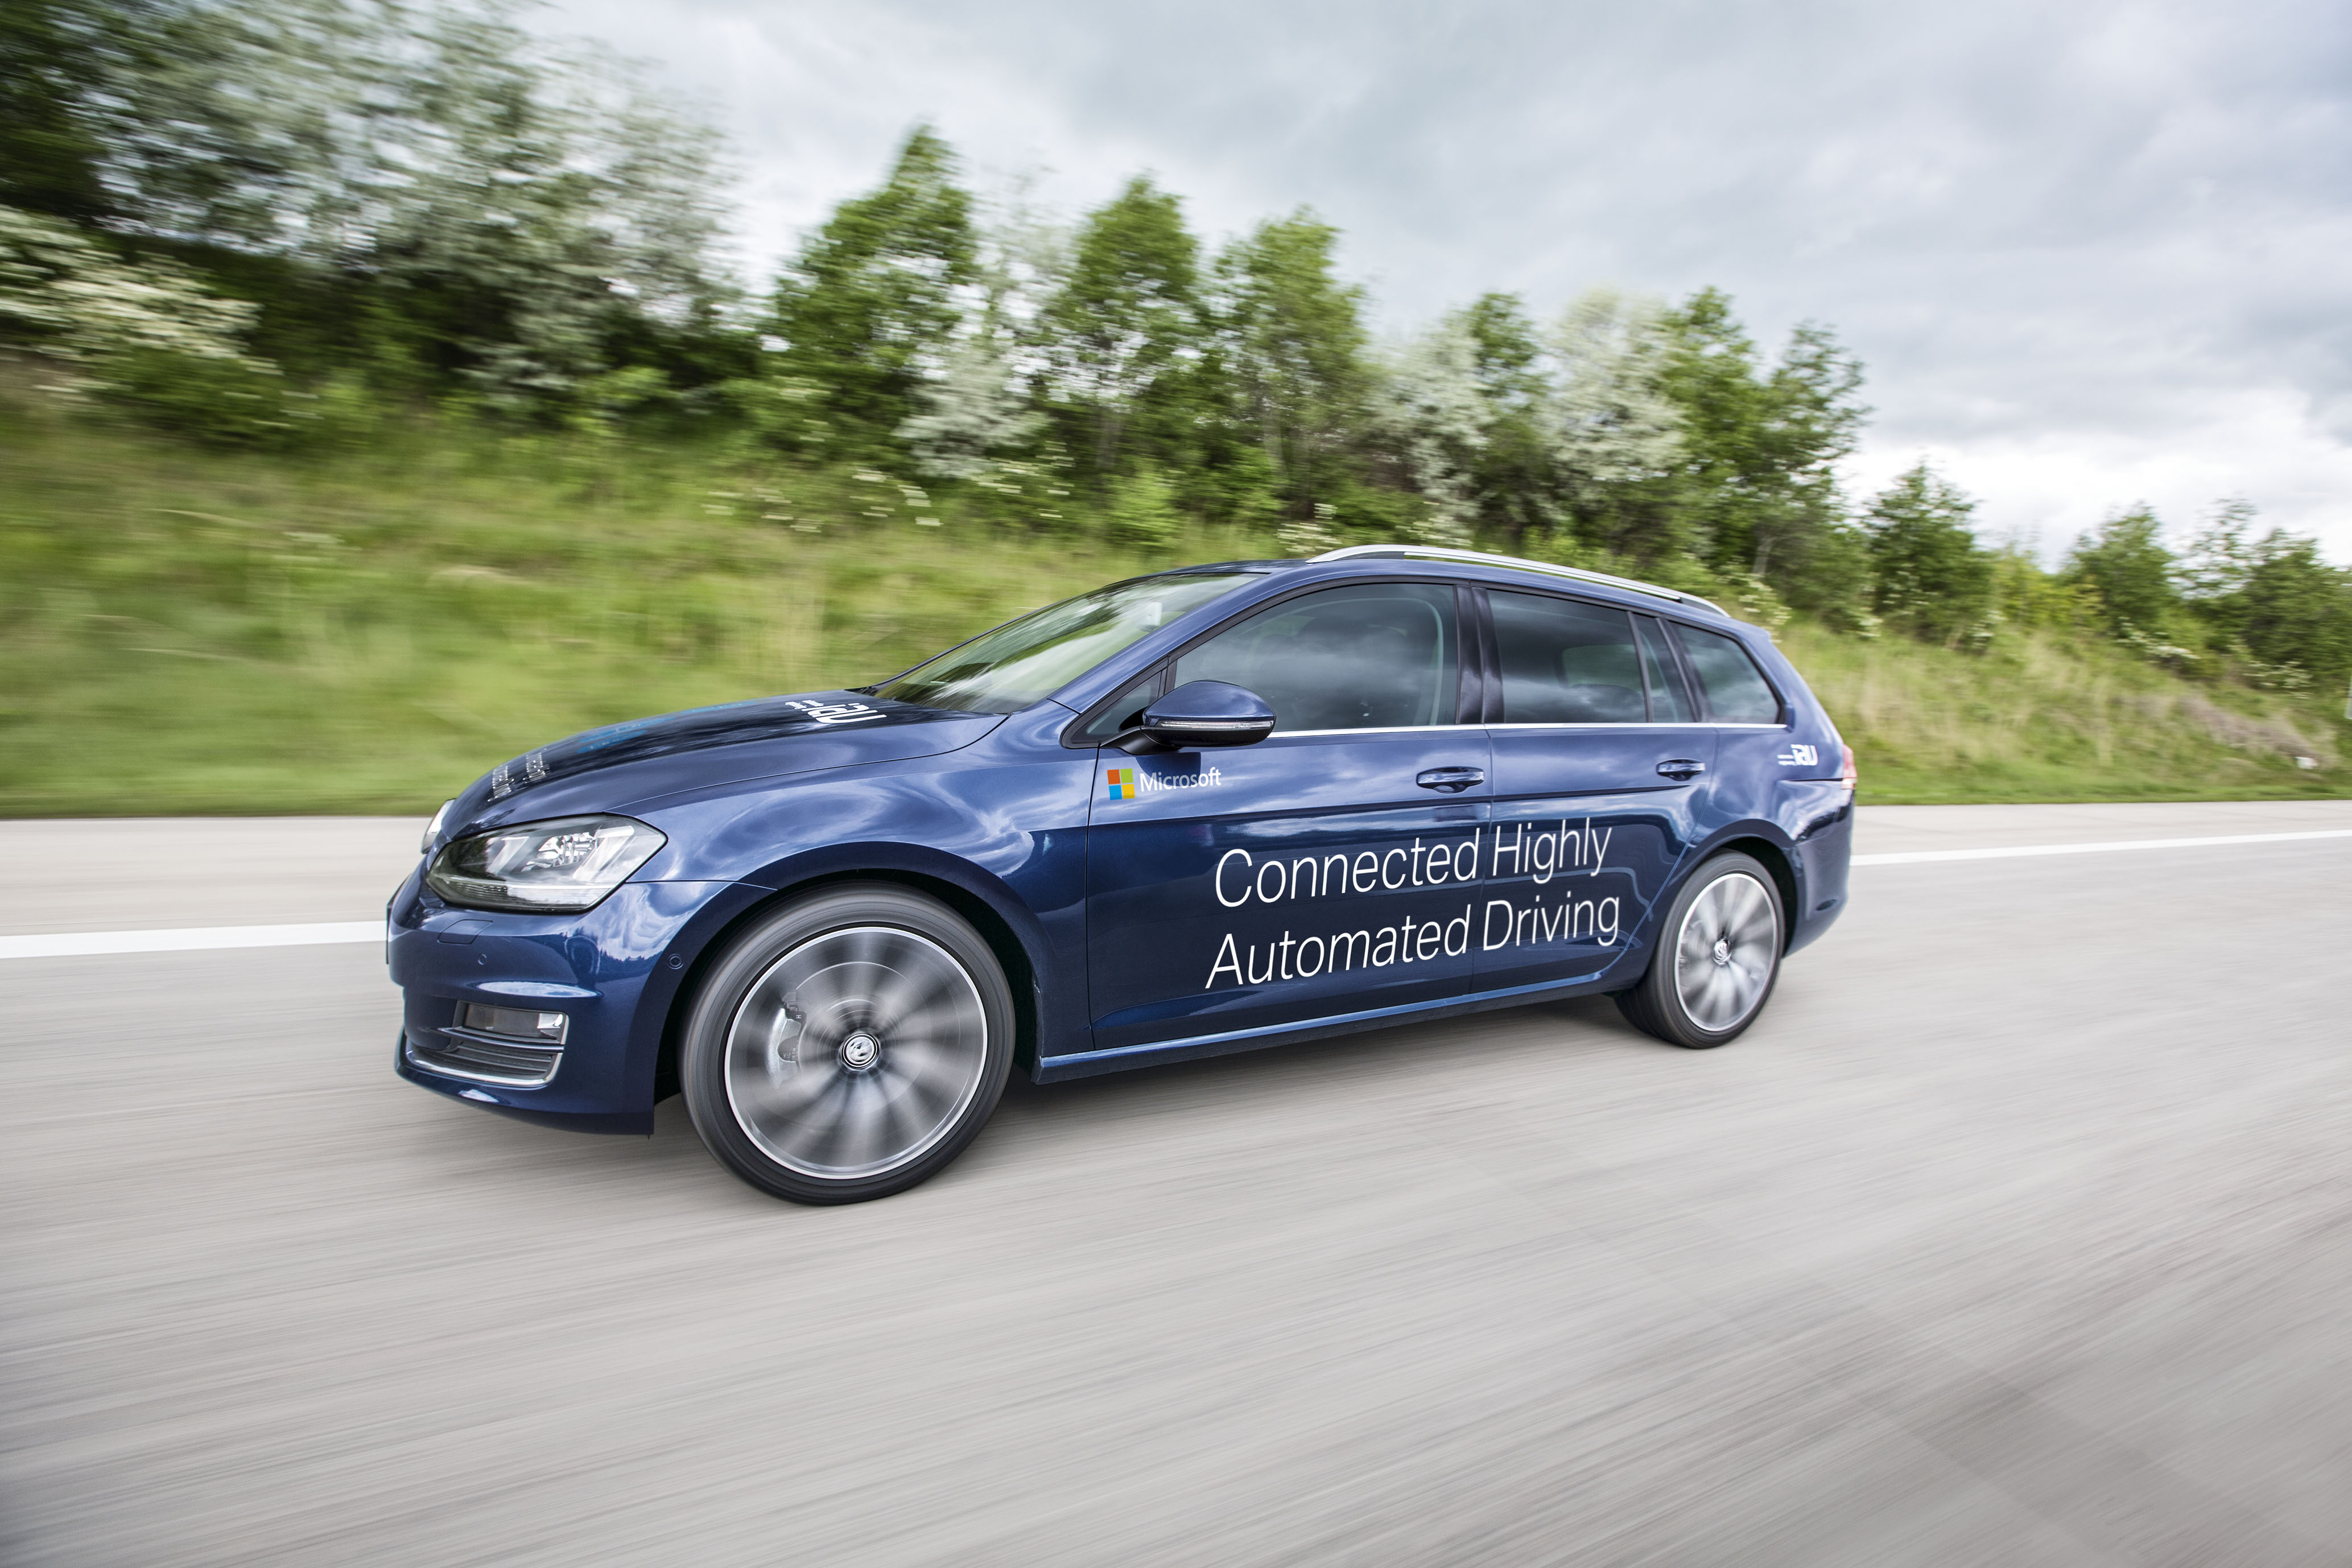 IAV connected highly automated driving